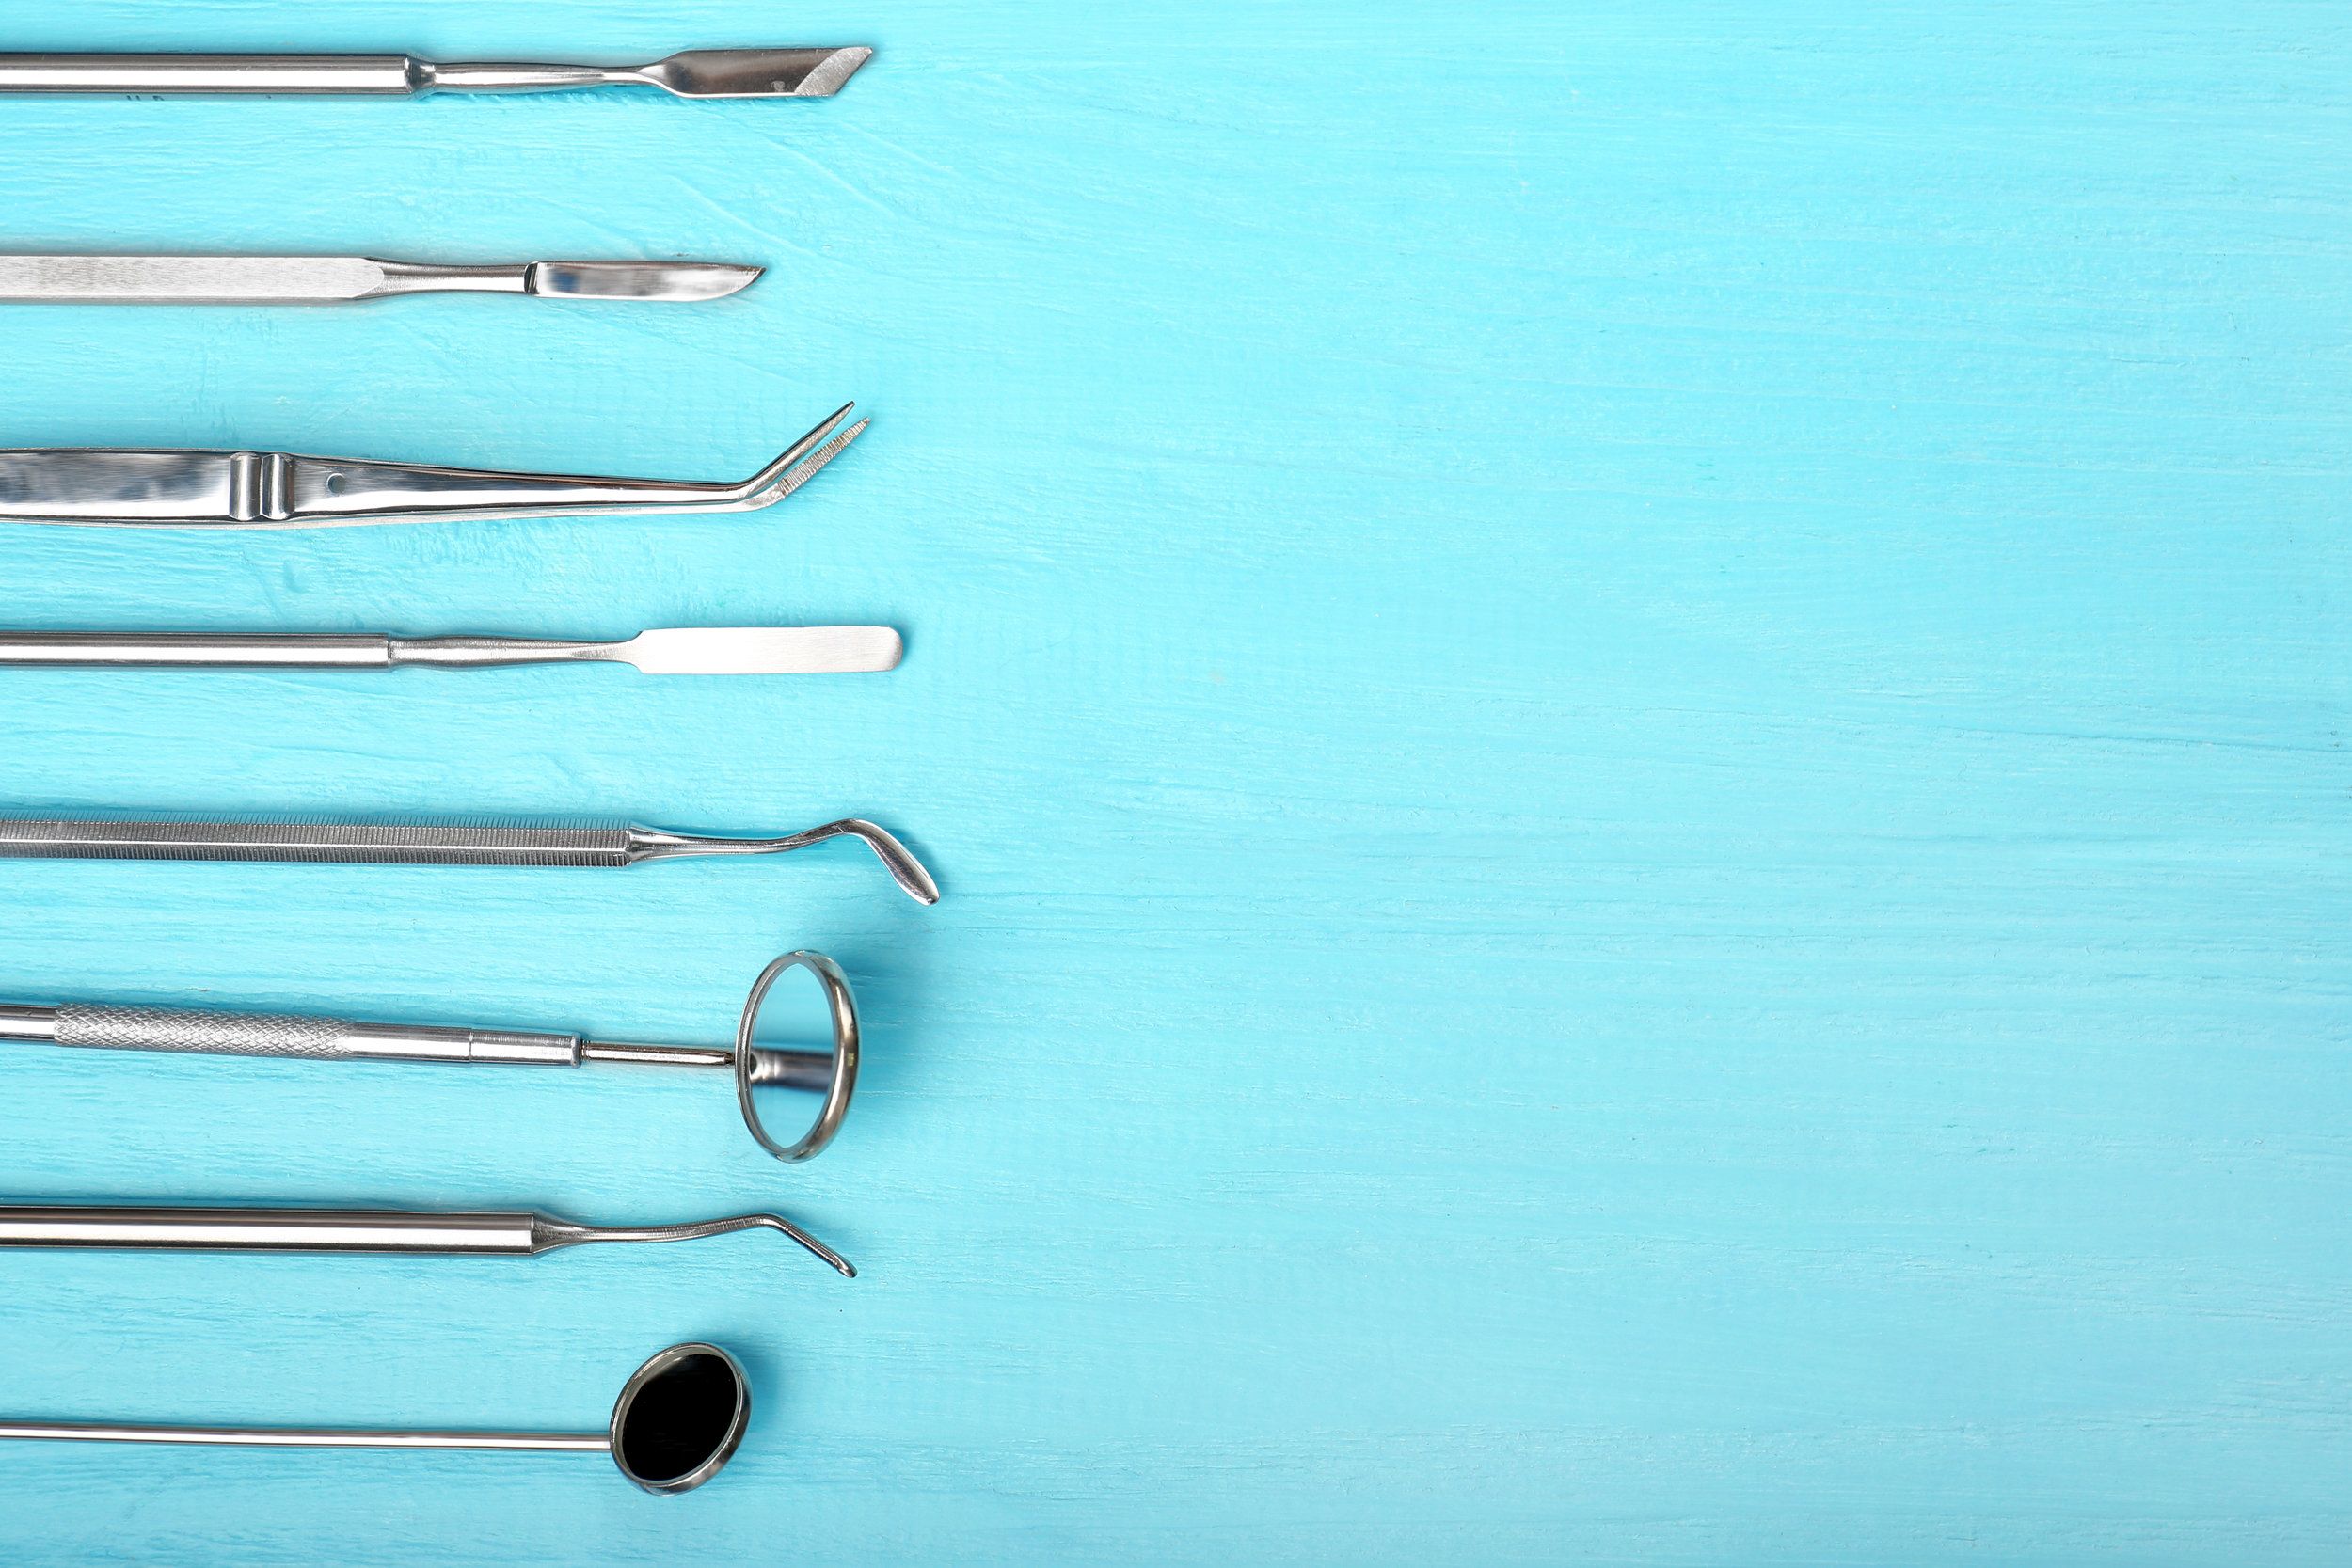 A row of dental tools on top - Dentist